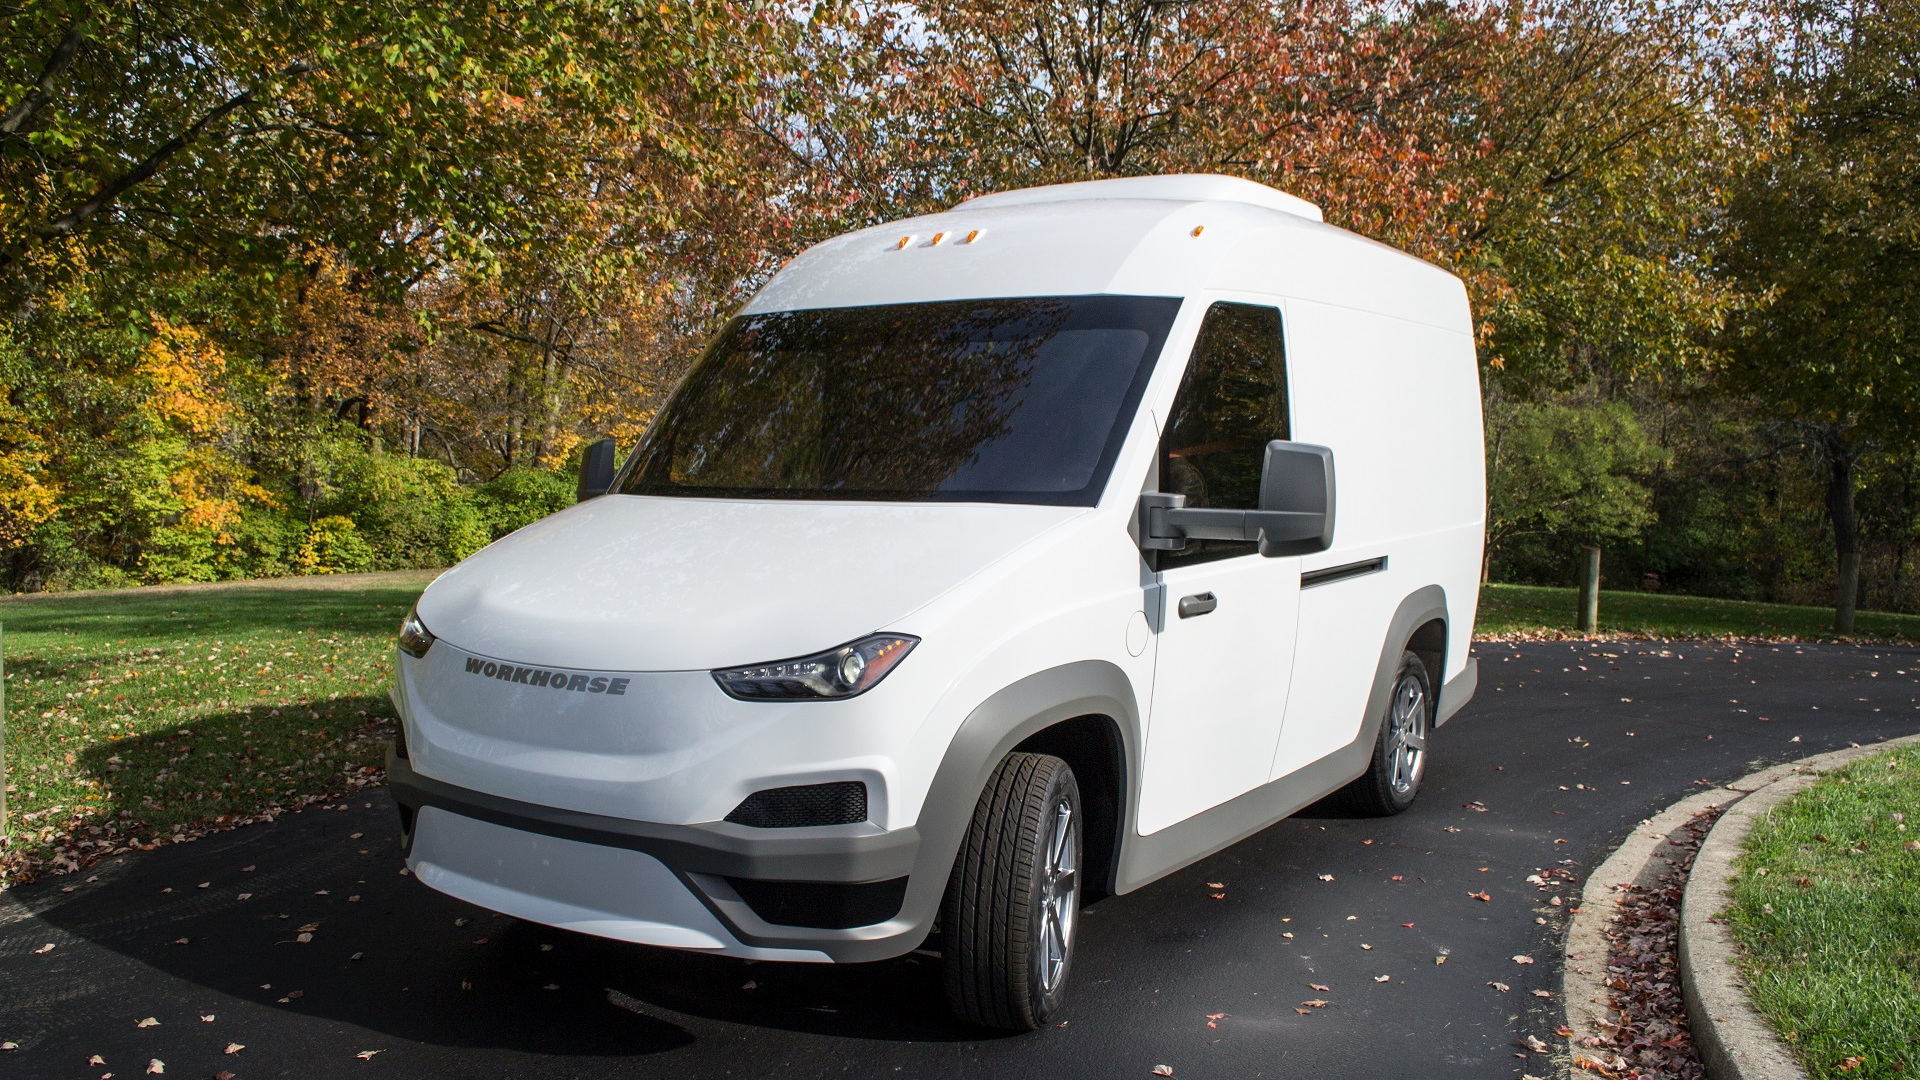 Workhorse NGen electric parcel van comes with optional drone delivery